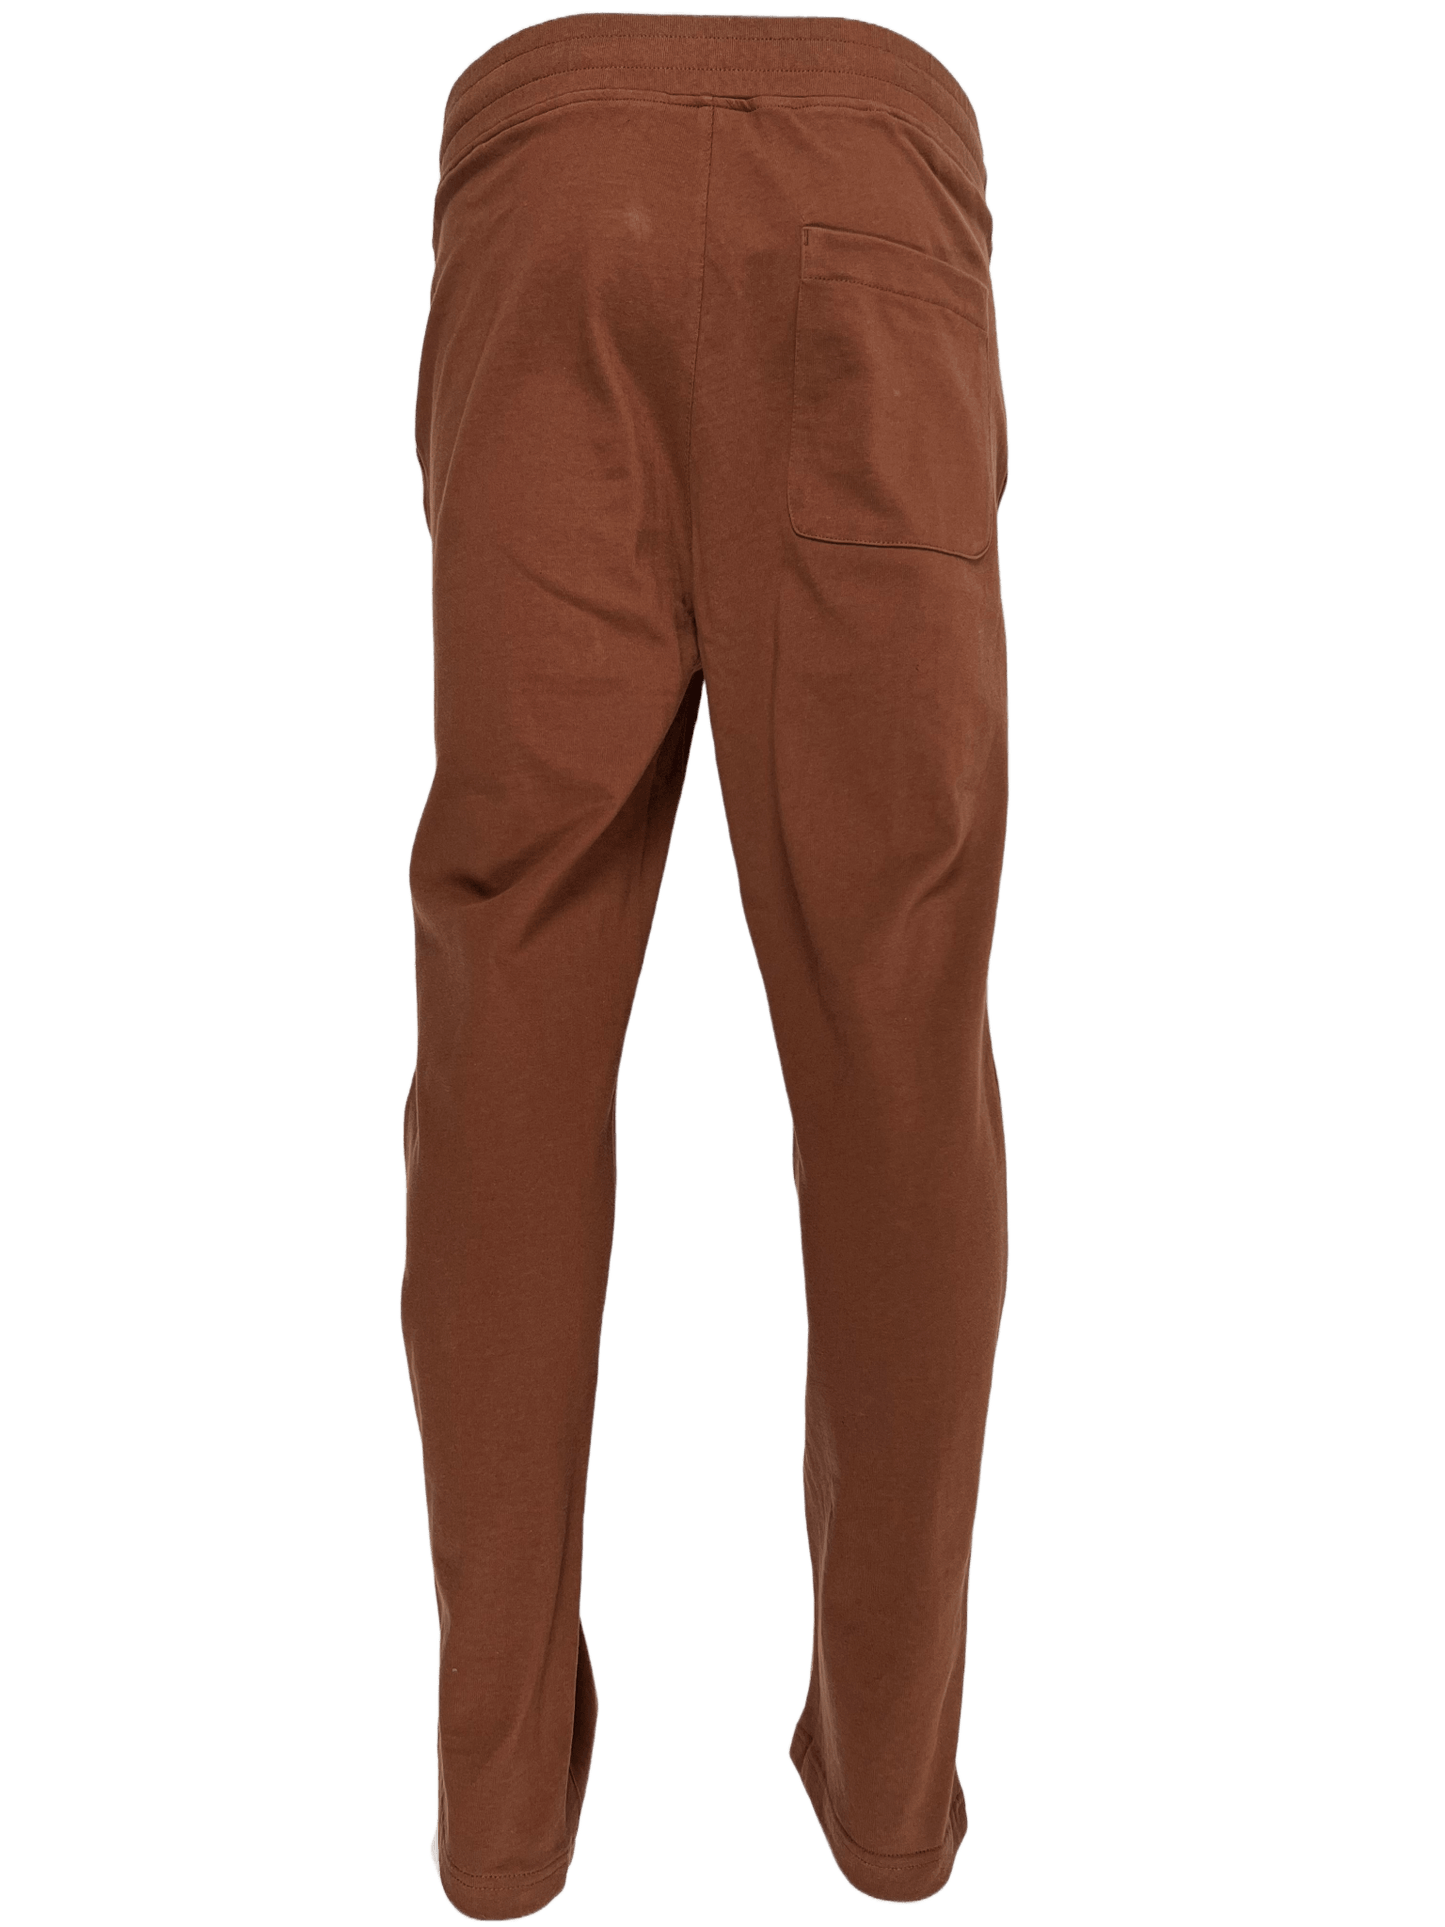 The back view of a man's PLEASURES brown cotton sweat pants with an elastic waist.